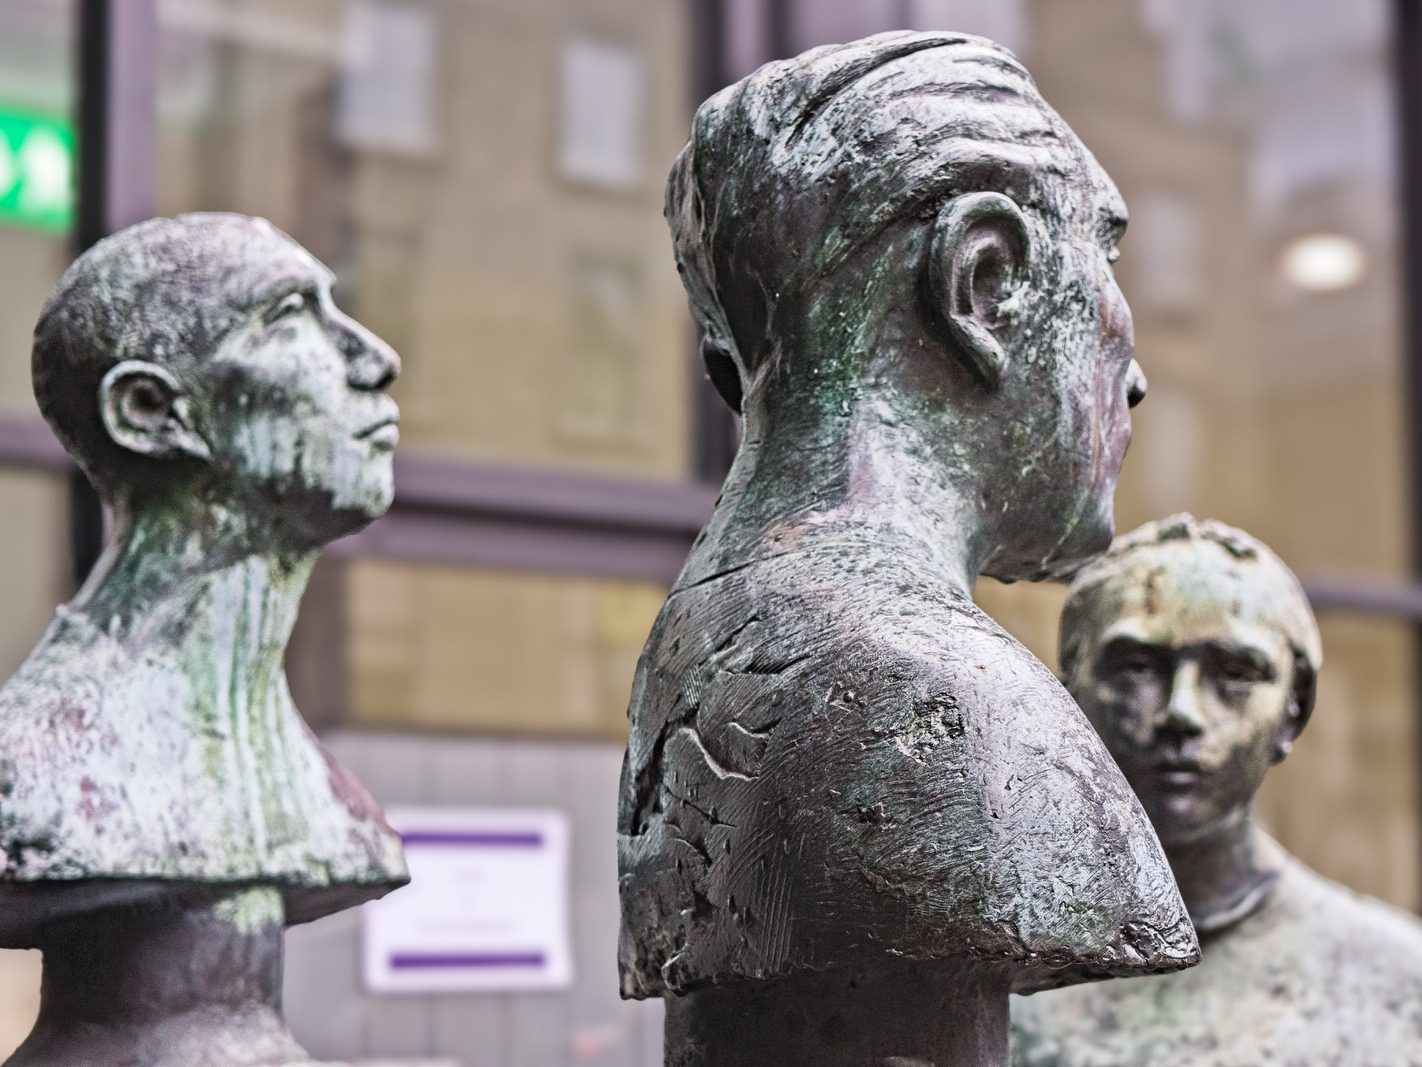 THE TALKING HEADS ON ABBEY STREET HAVE DISAPPEARED [MULTI PIECE SCULPTURE BY CAROLYN MULHOLLAND]-227458-1